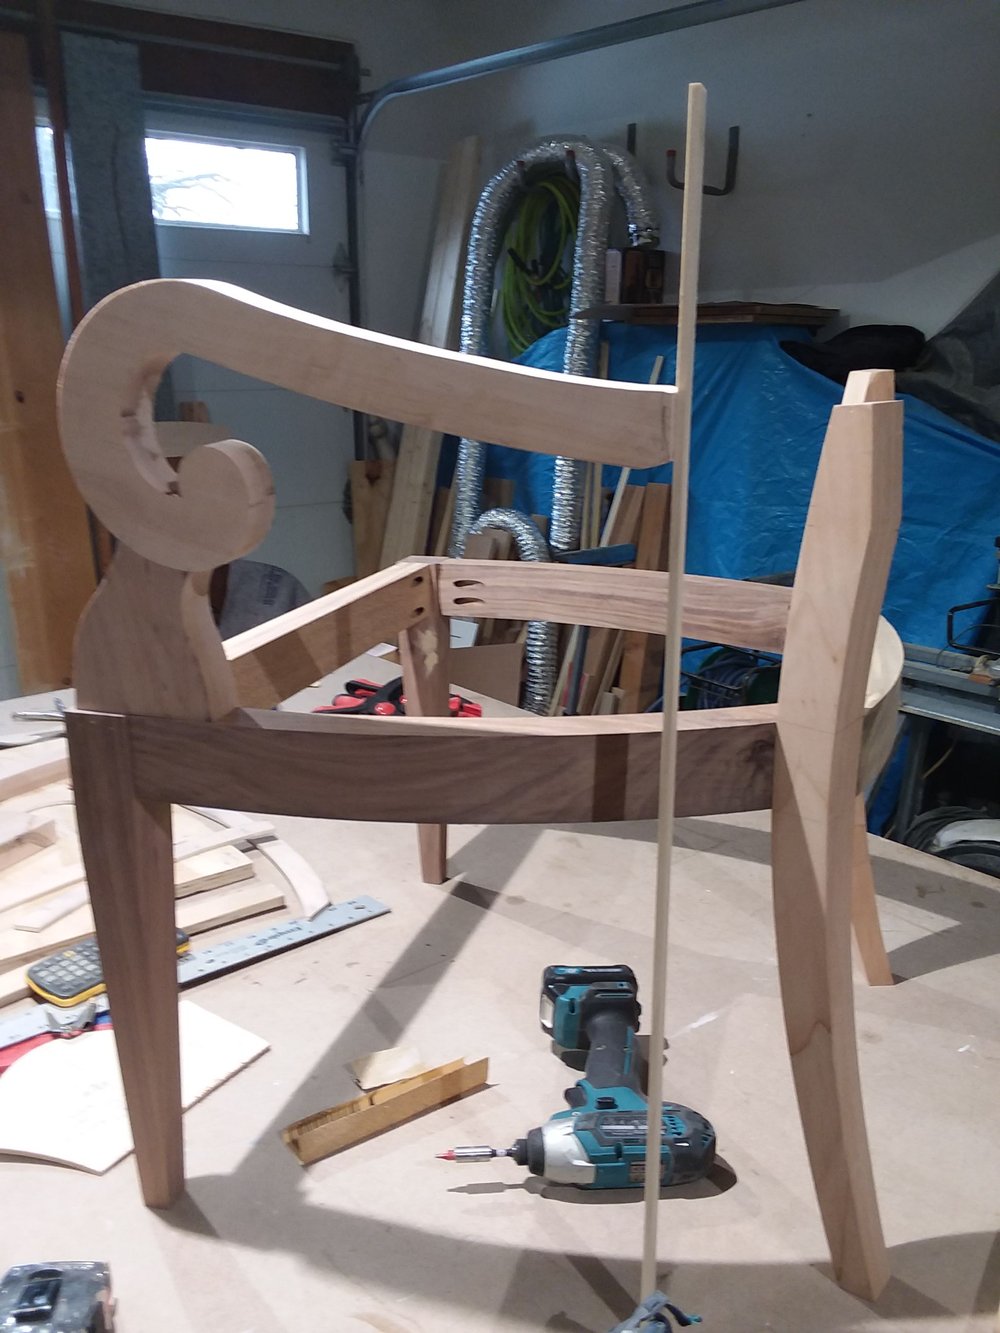 Chair Arms Installed on Frame